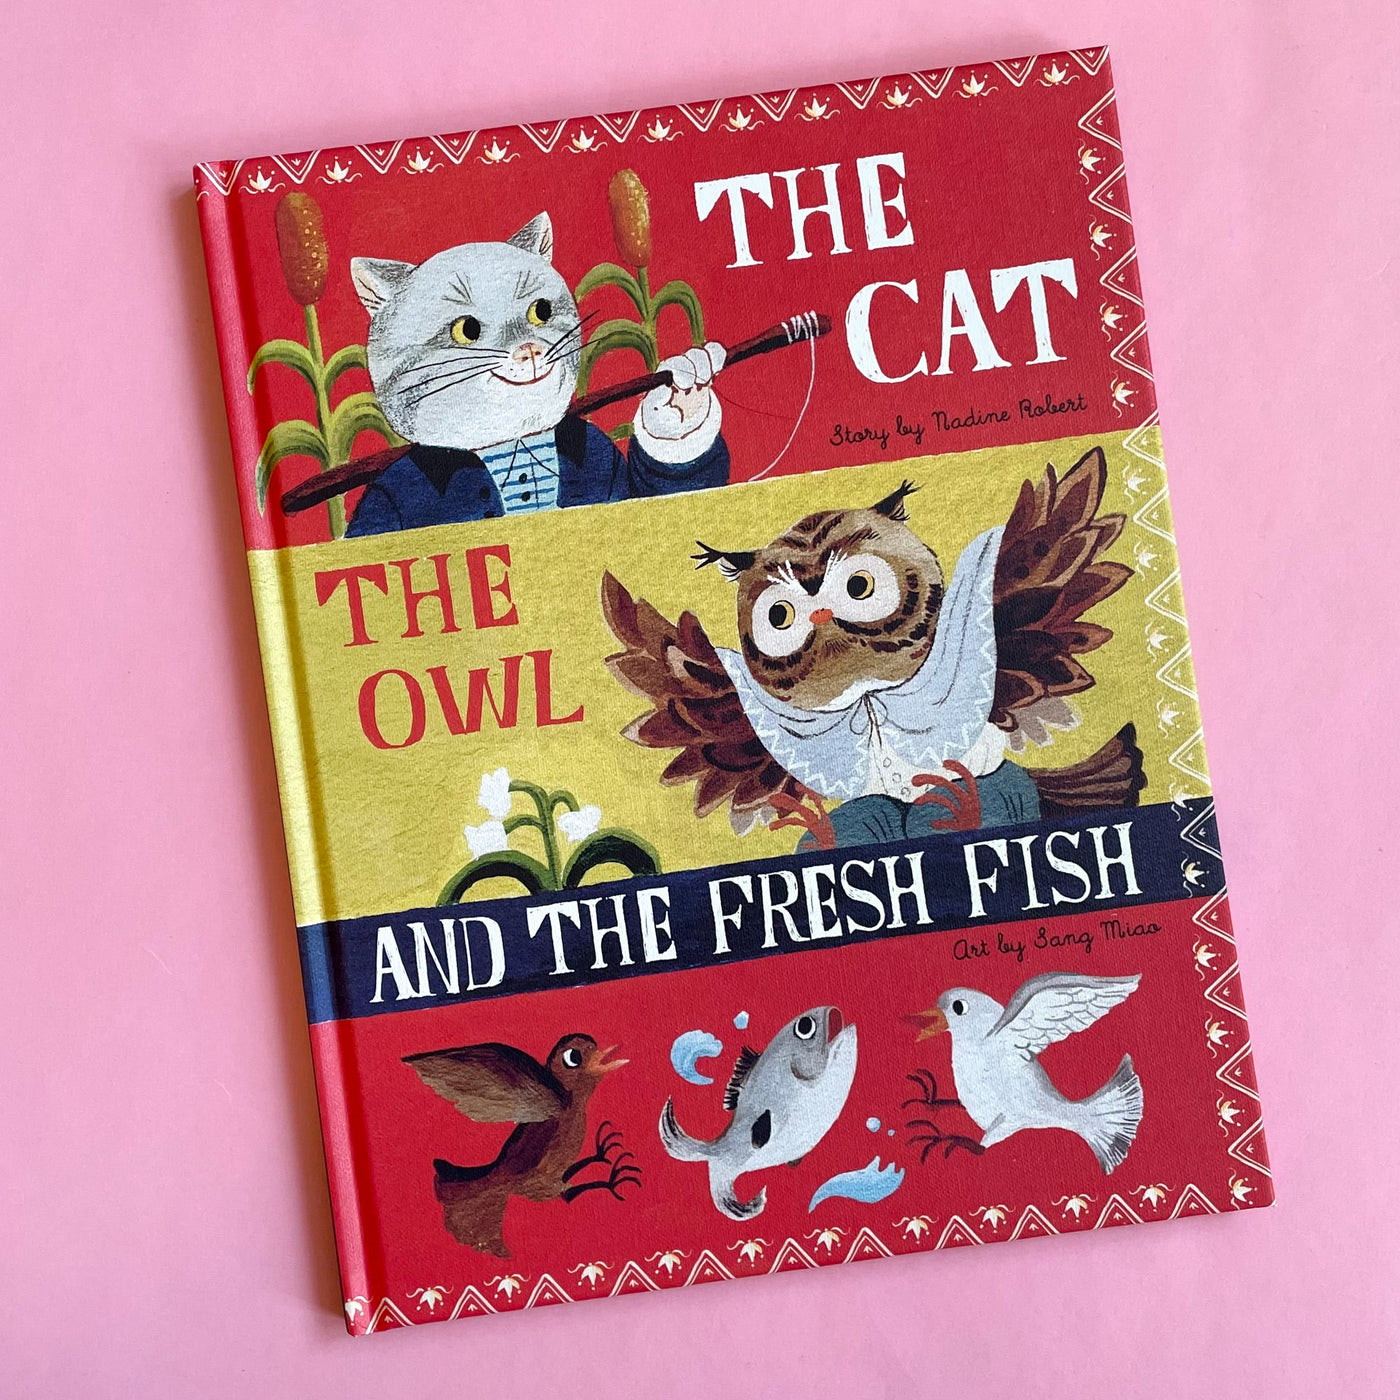 The Cat, the Owl and the Fresh Fish by Nadine Robert and Sang Miao